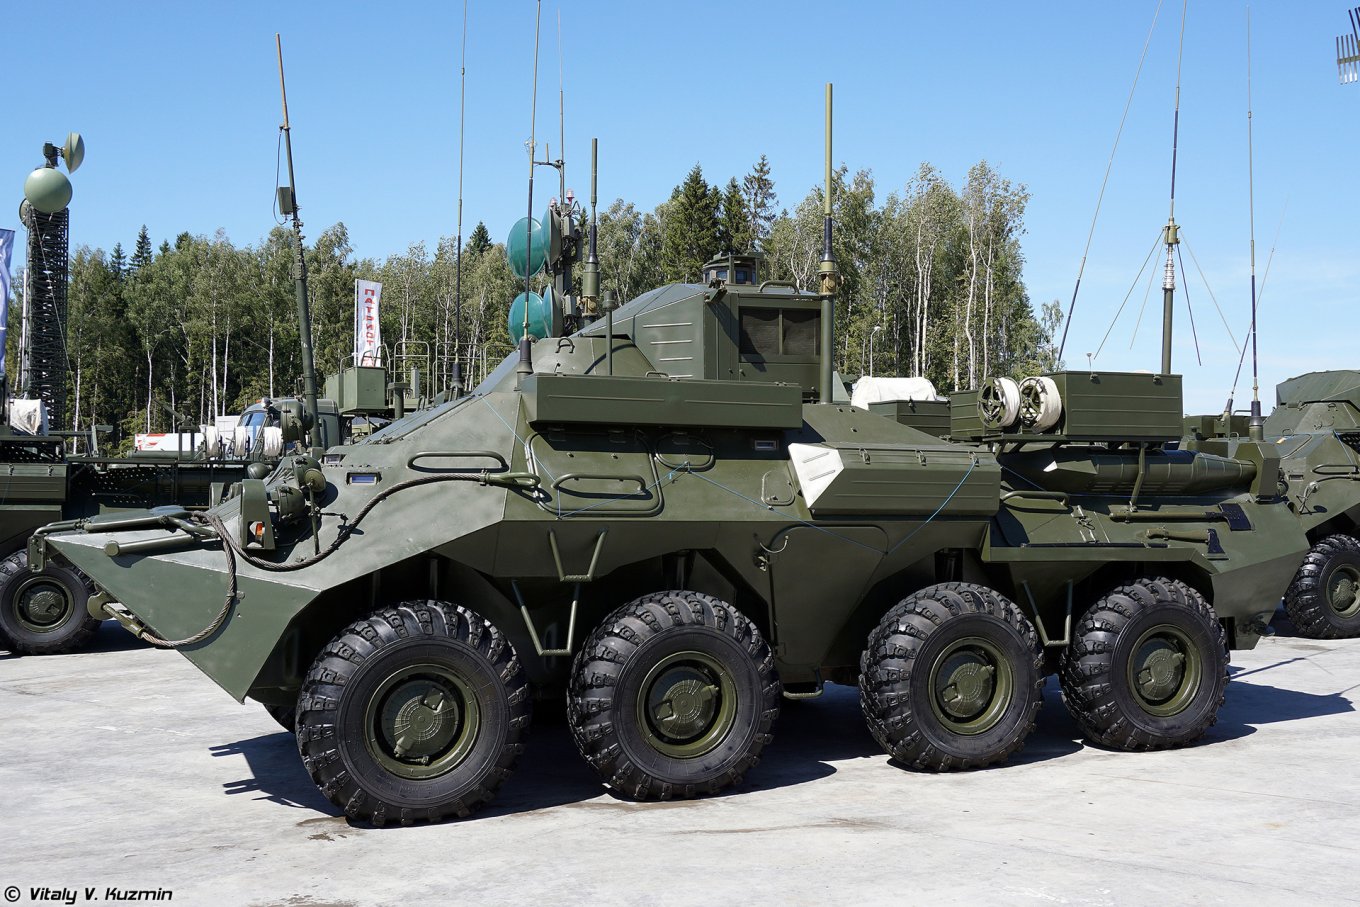 Russian military command and control vehicle R-149МА1 at an exhibition